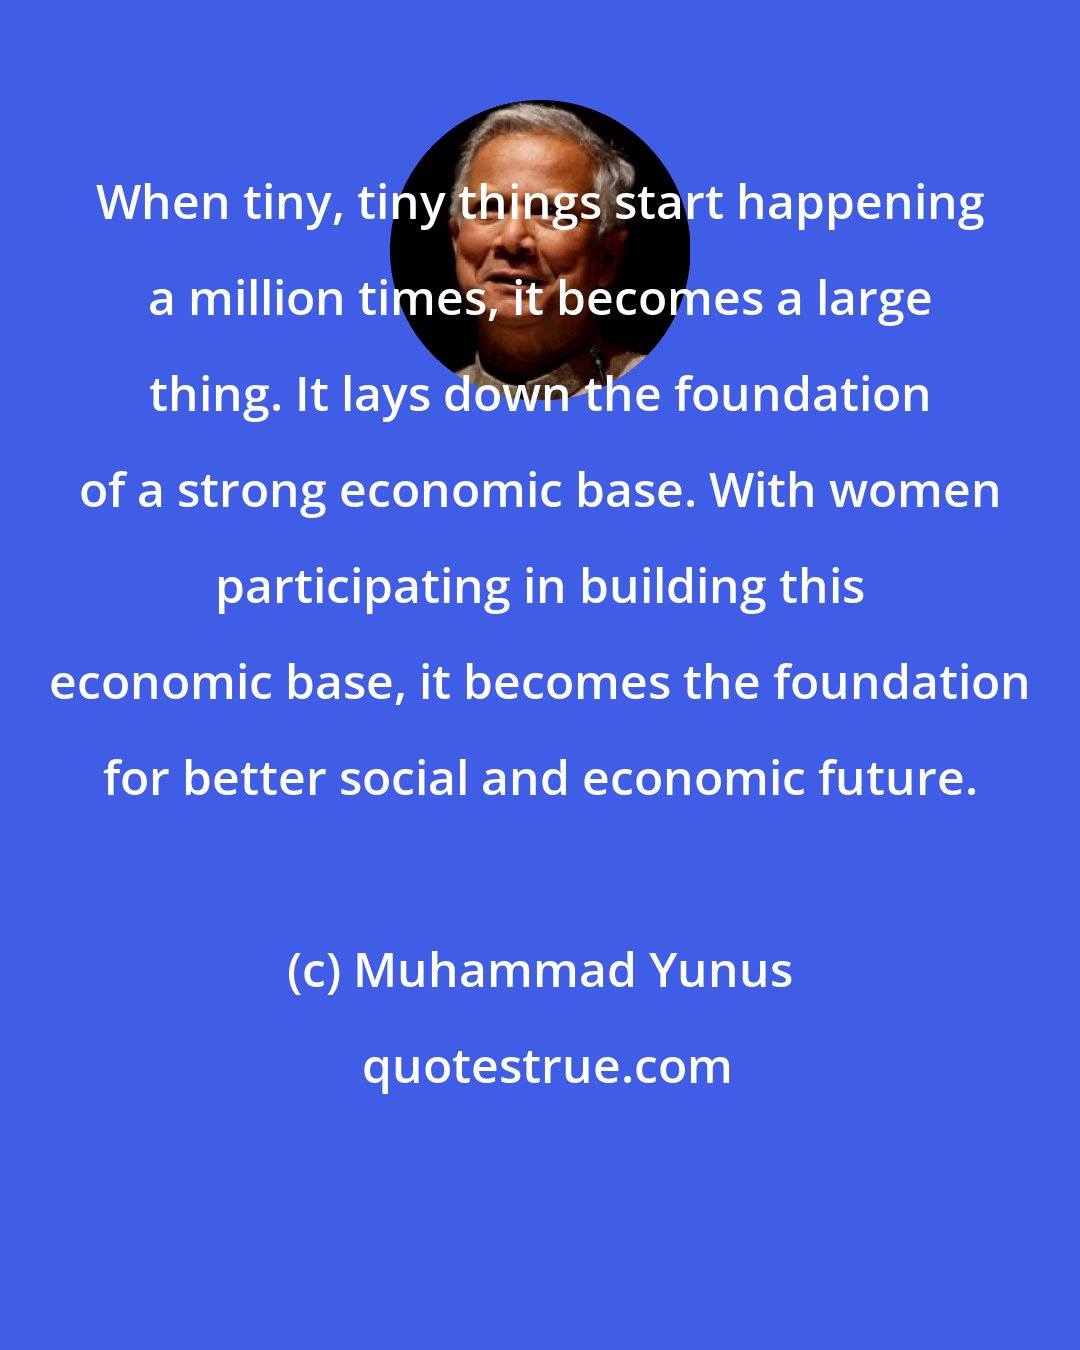 Muhammad Yunus: When tiny, tiny things start happening a million times, it becomes a large thing. It lays down the foundation of a strong economic base. With women participating in building this economic base, it becomes the foundation for better social and economic future.